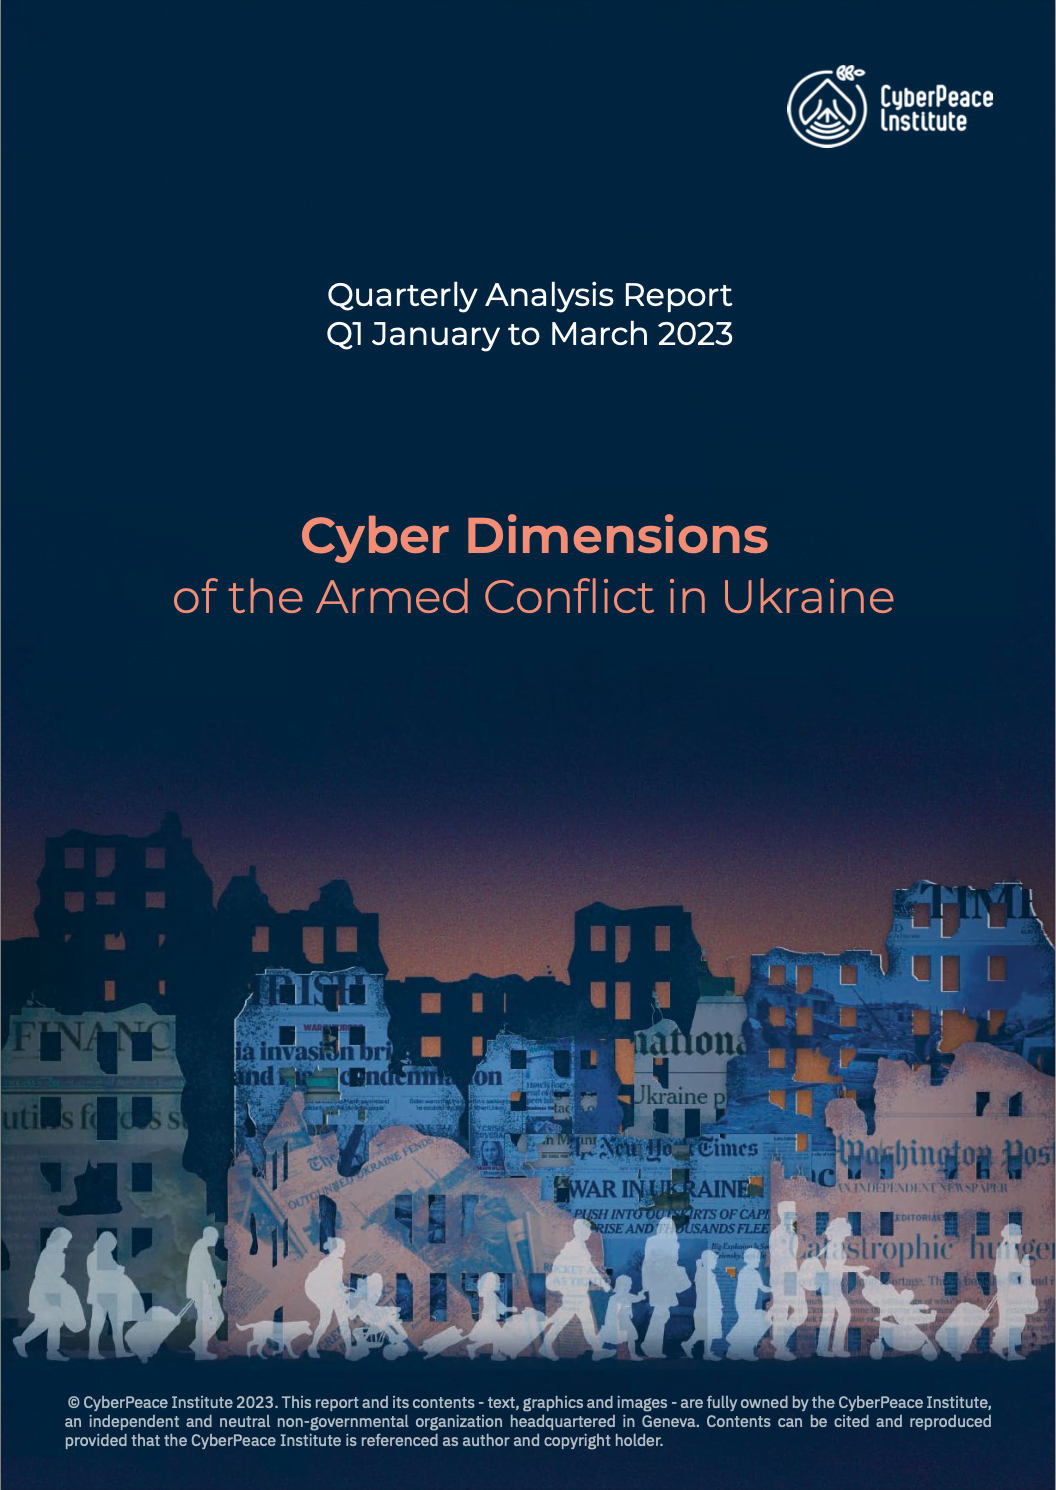 Cyber Dimensions of the Armed Conflict in Ukraine – Q1 2023